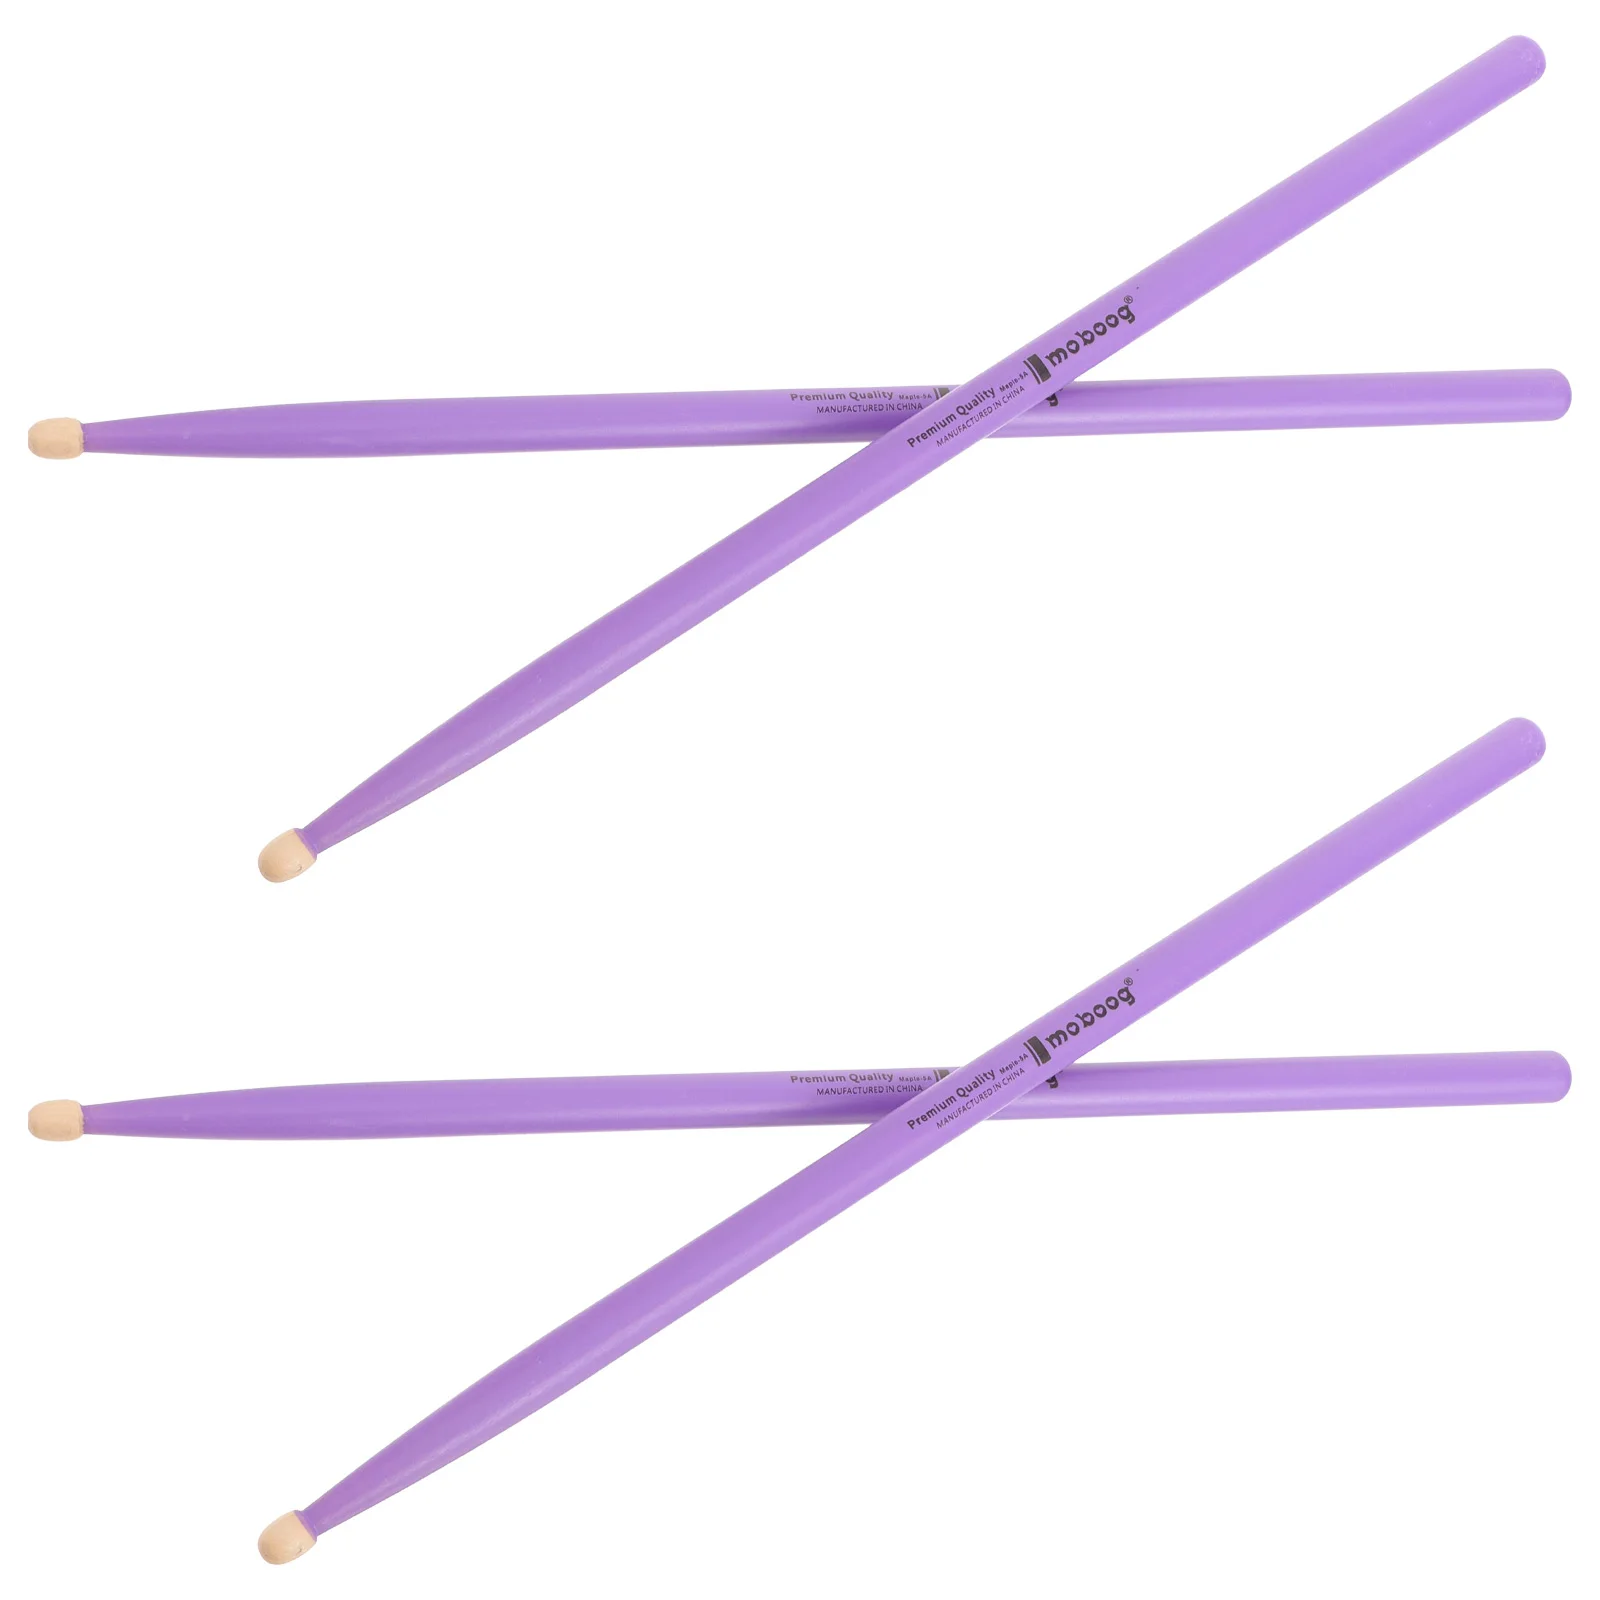 4pcs Maple Sticks Simple Drumsticks Percussion Instruments Stick Wooden Drumsticks Cute Instruments For Adult Students To Use instrument mallets 5a maple wood sticks musical instruments drumsticks for practice